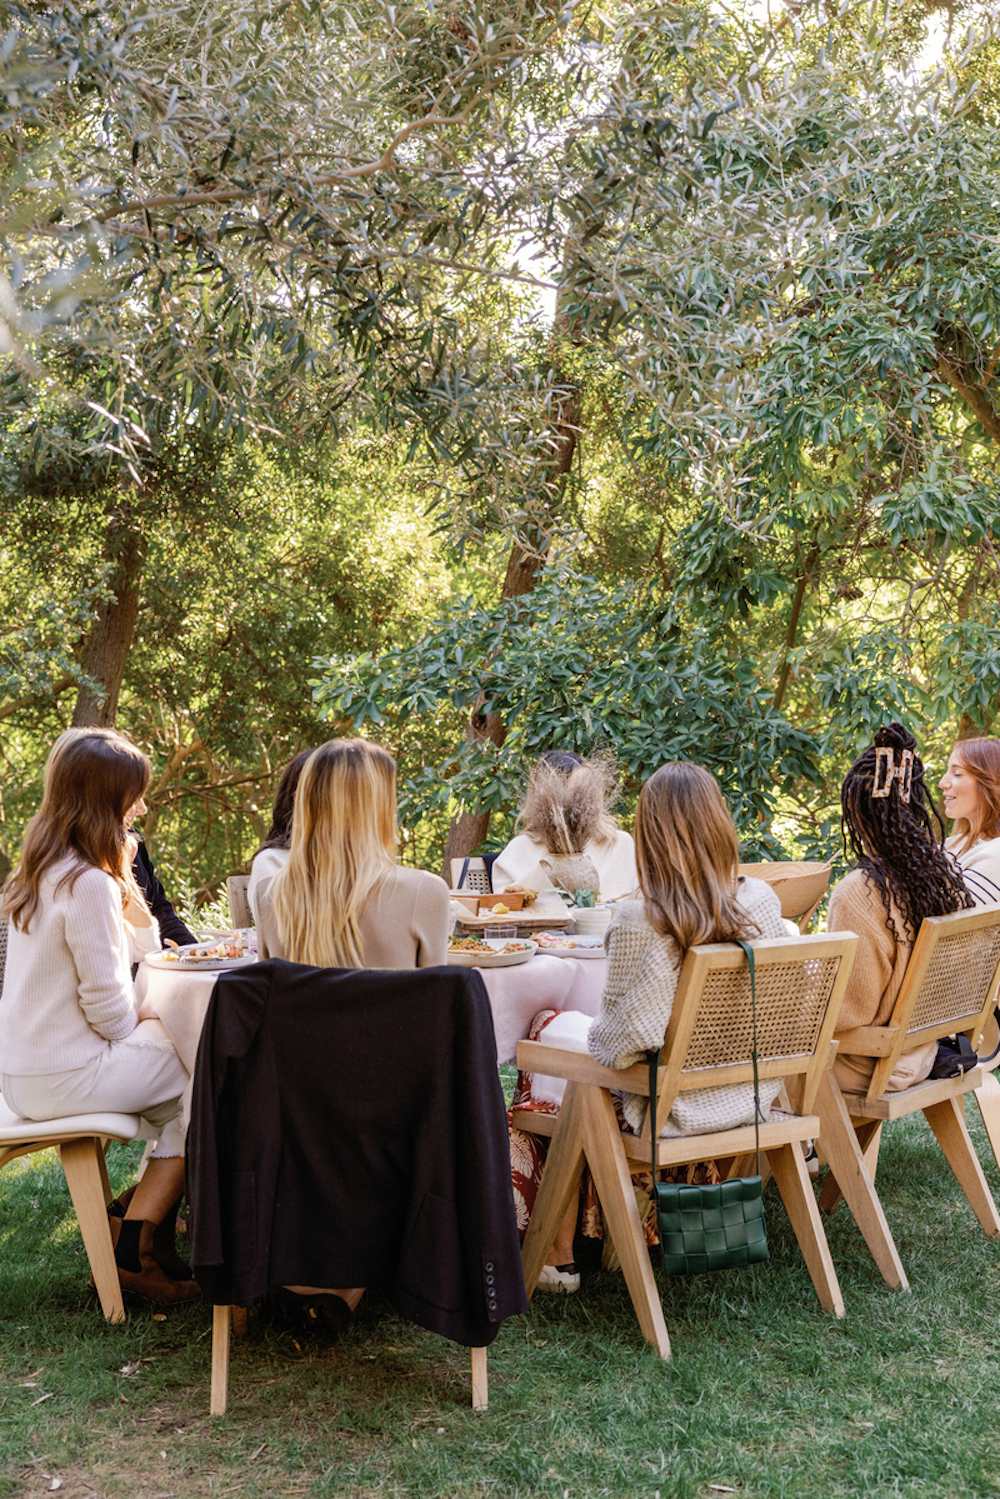 Women eating meal at outdoor dining table.